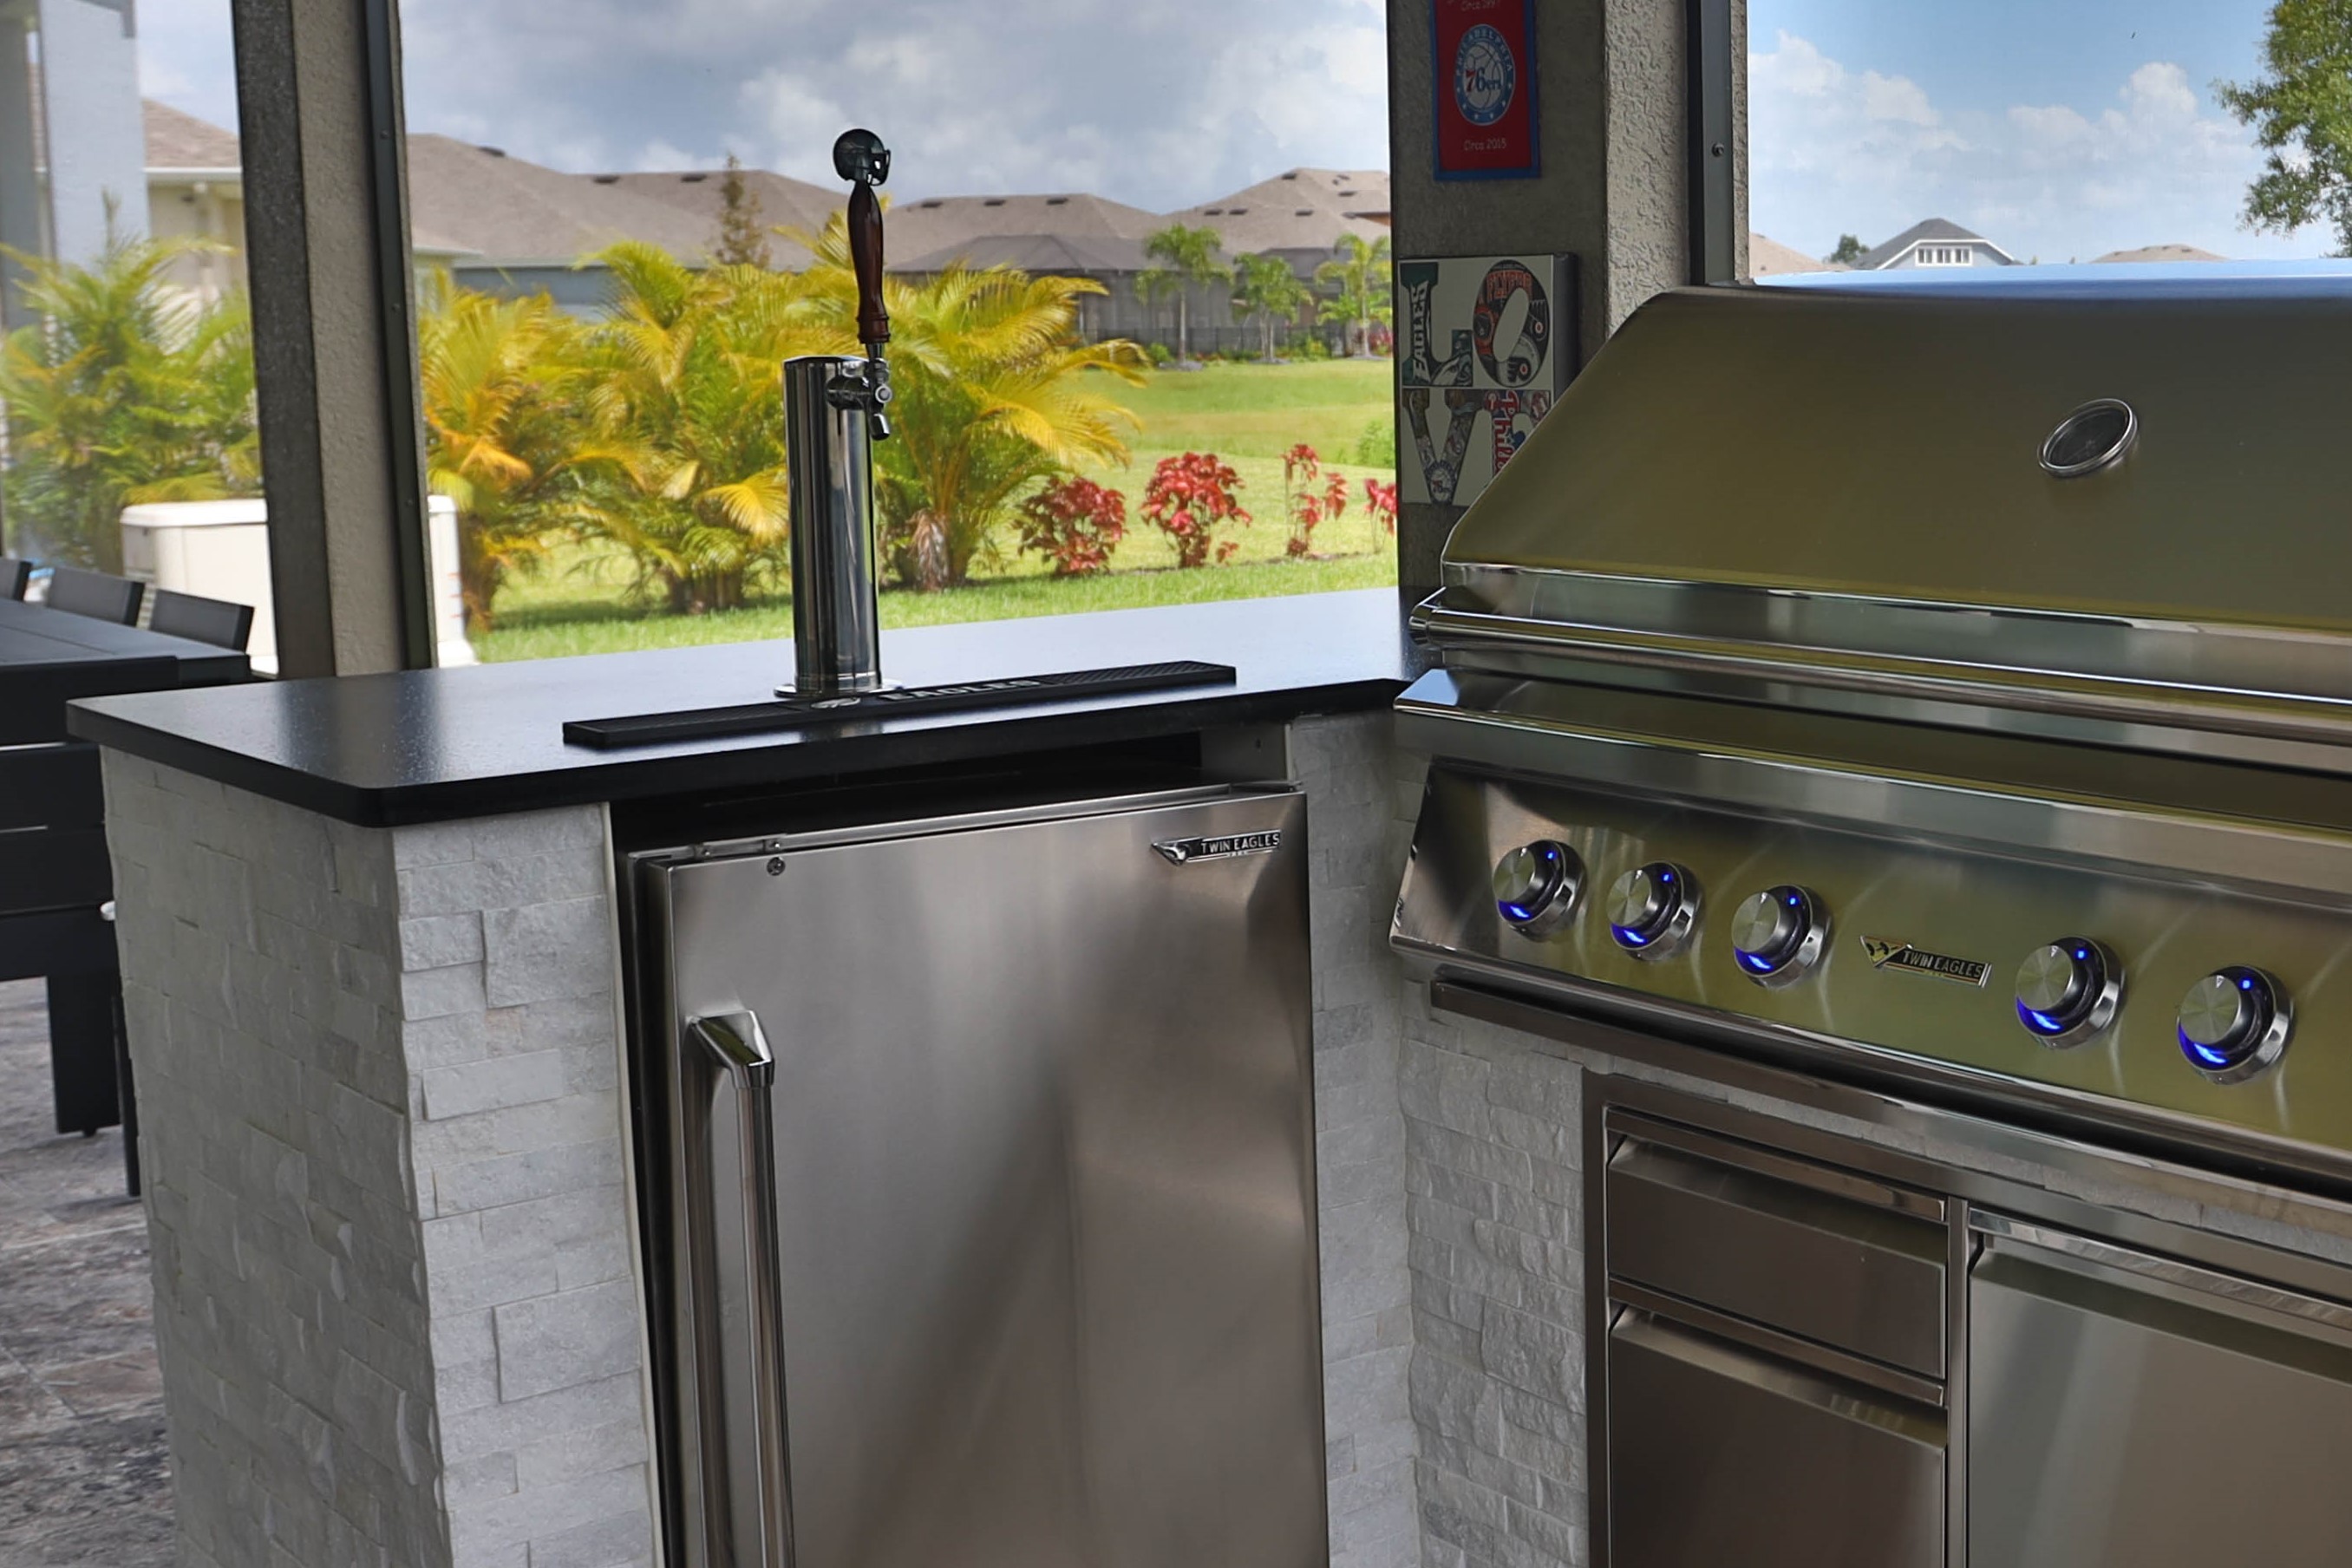 Bring the Party: Adding an Outdoor Kegerator to your Kitchen